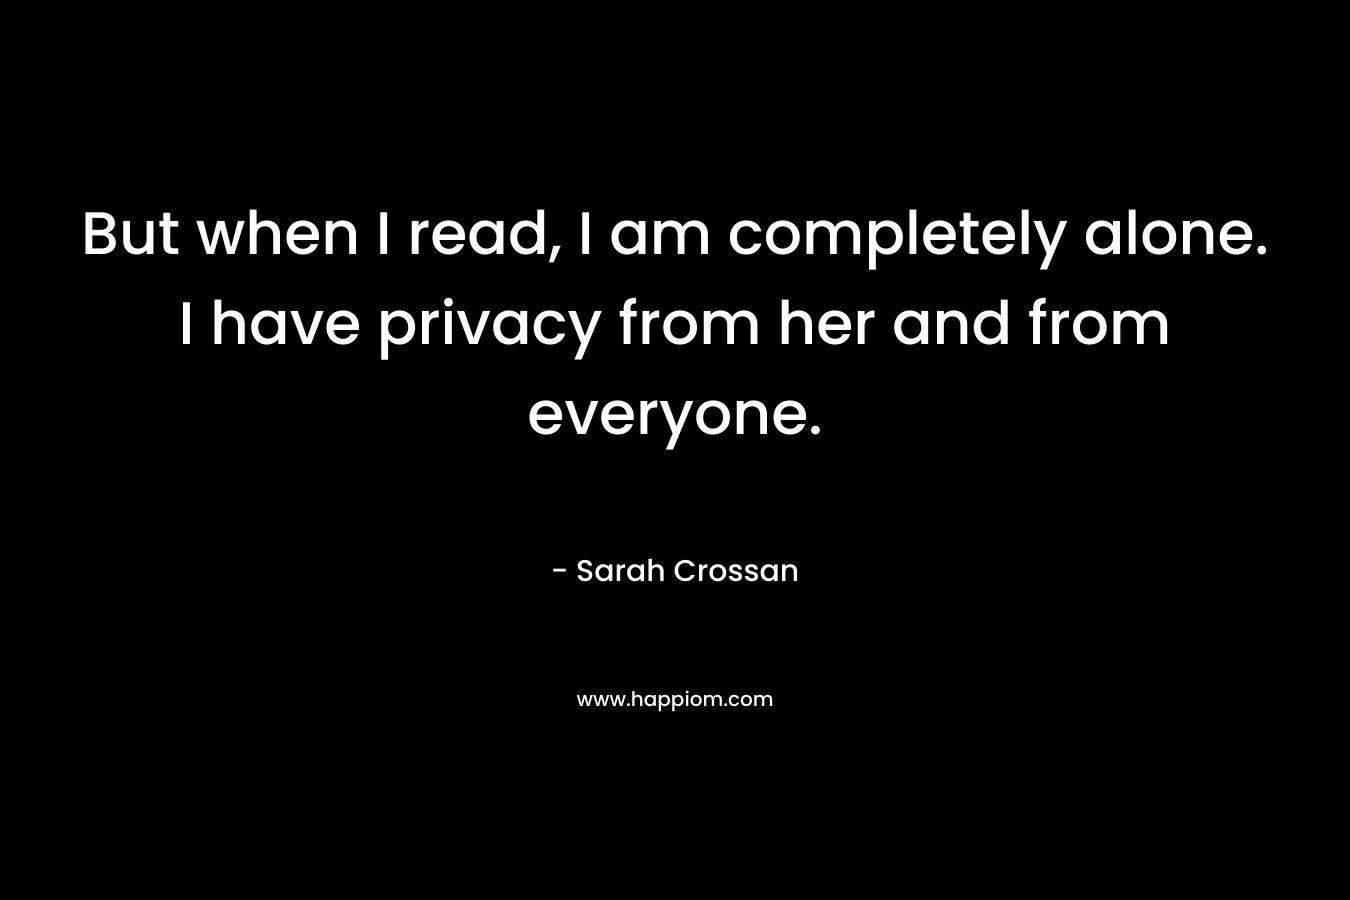 But when I read, I am completely alone. I have privacy from her and from everyone. – Sarah Crossan